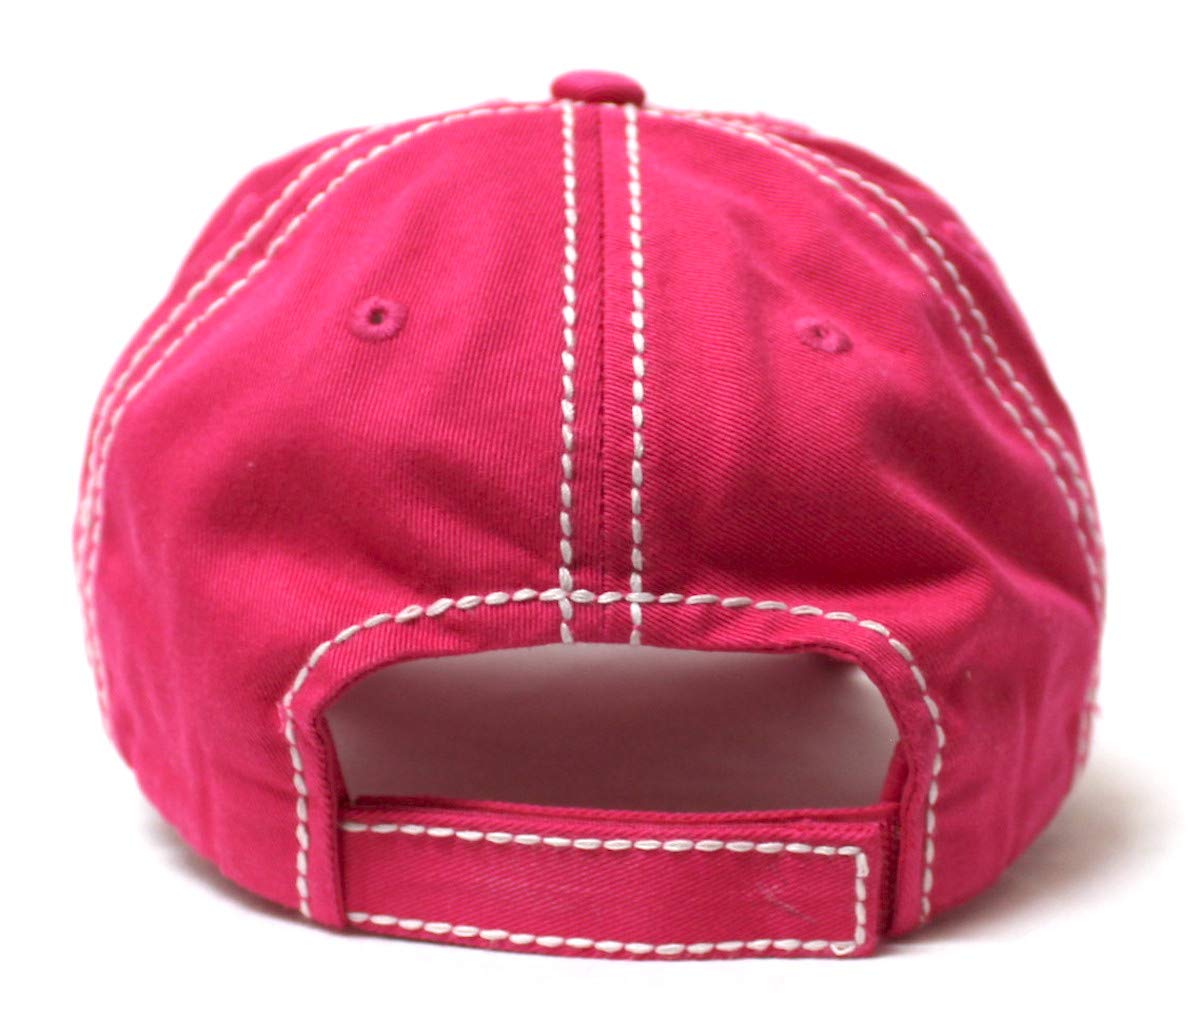 CAPS 'N VINTAGE Women's Baseball Cap Super Mom, Super Tired, Super Blessed Patch Embroidery Hat, Hot Pink